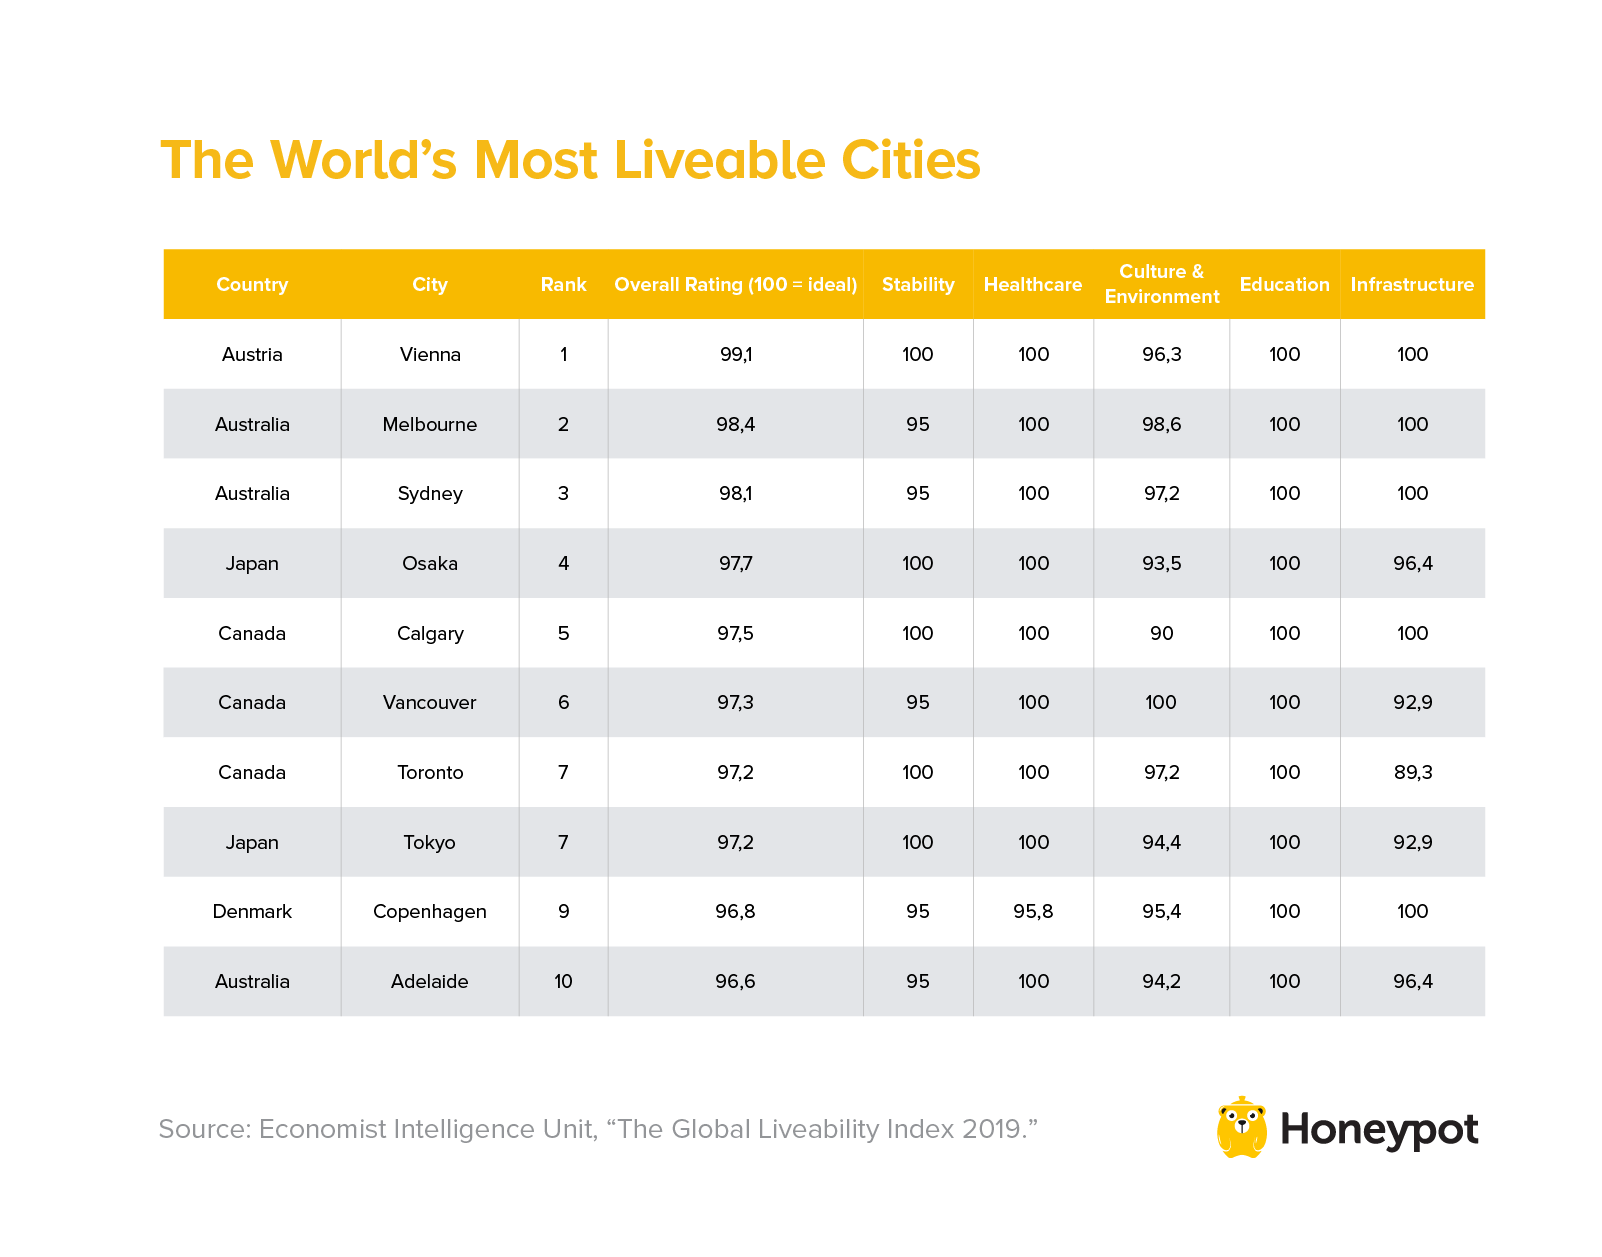 The world's most liveable cities